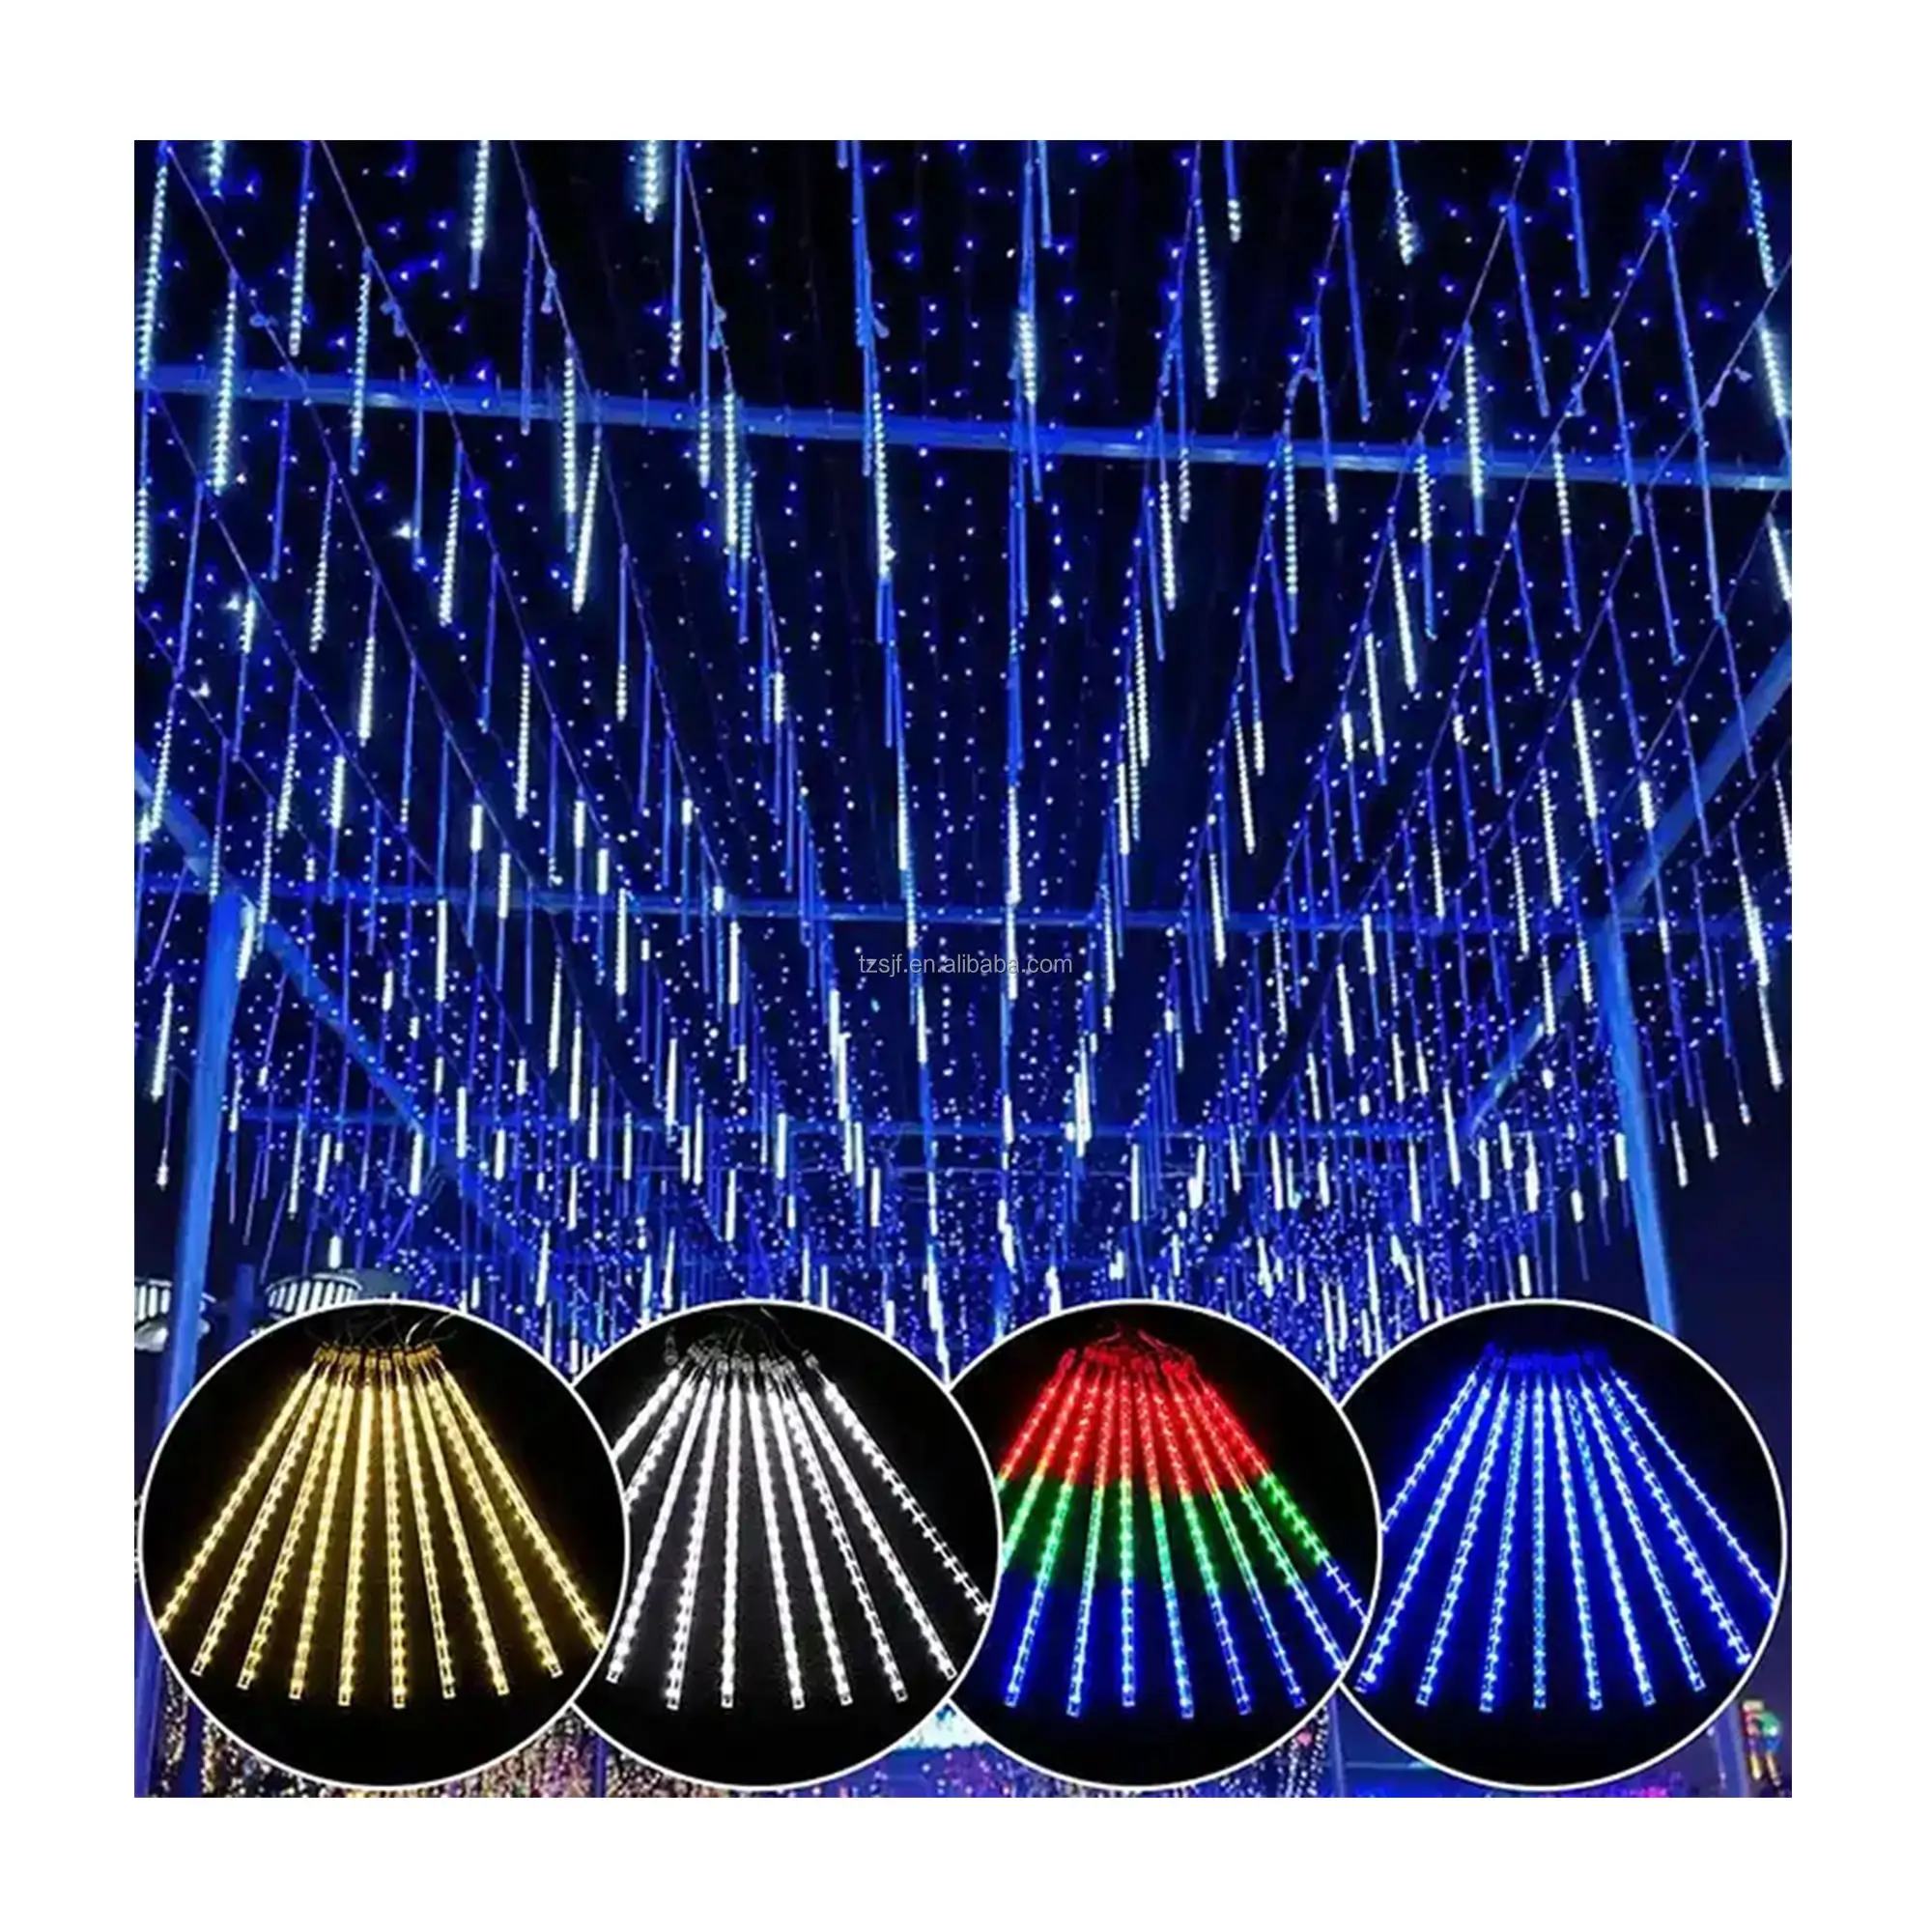 Hot Selling Outdoor Led Meteor Shower Lamp Rain String Tube Lights For Wedding Party Festival Holiday Decoration